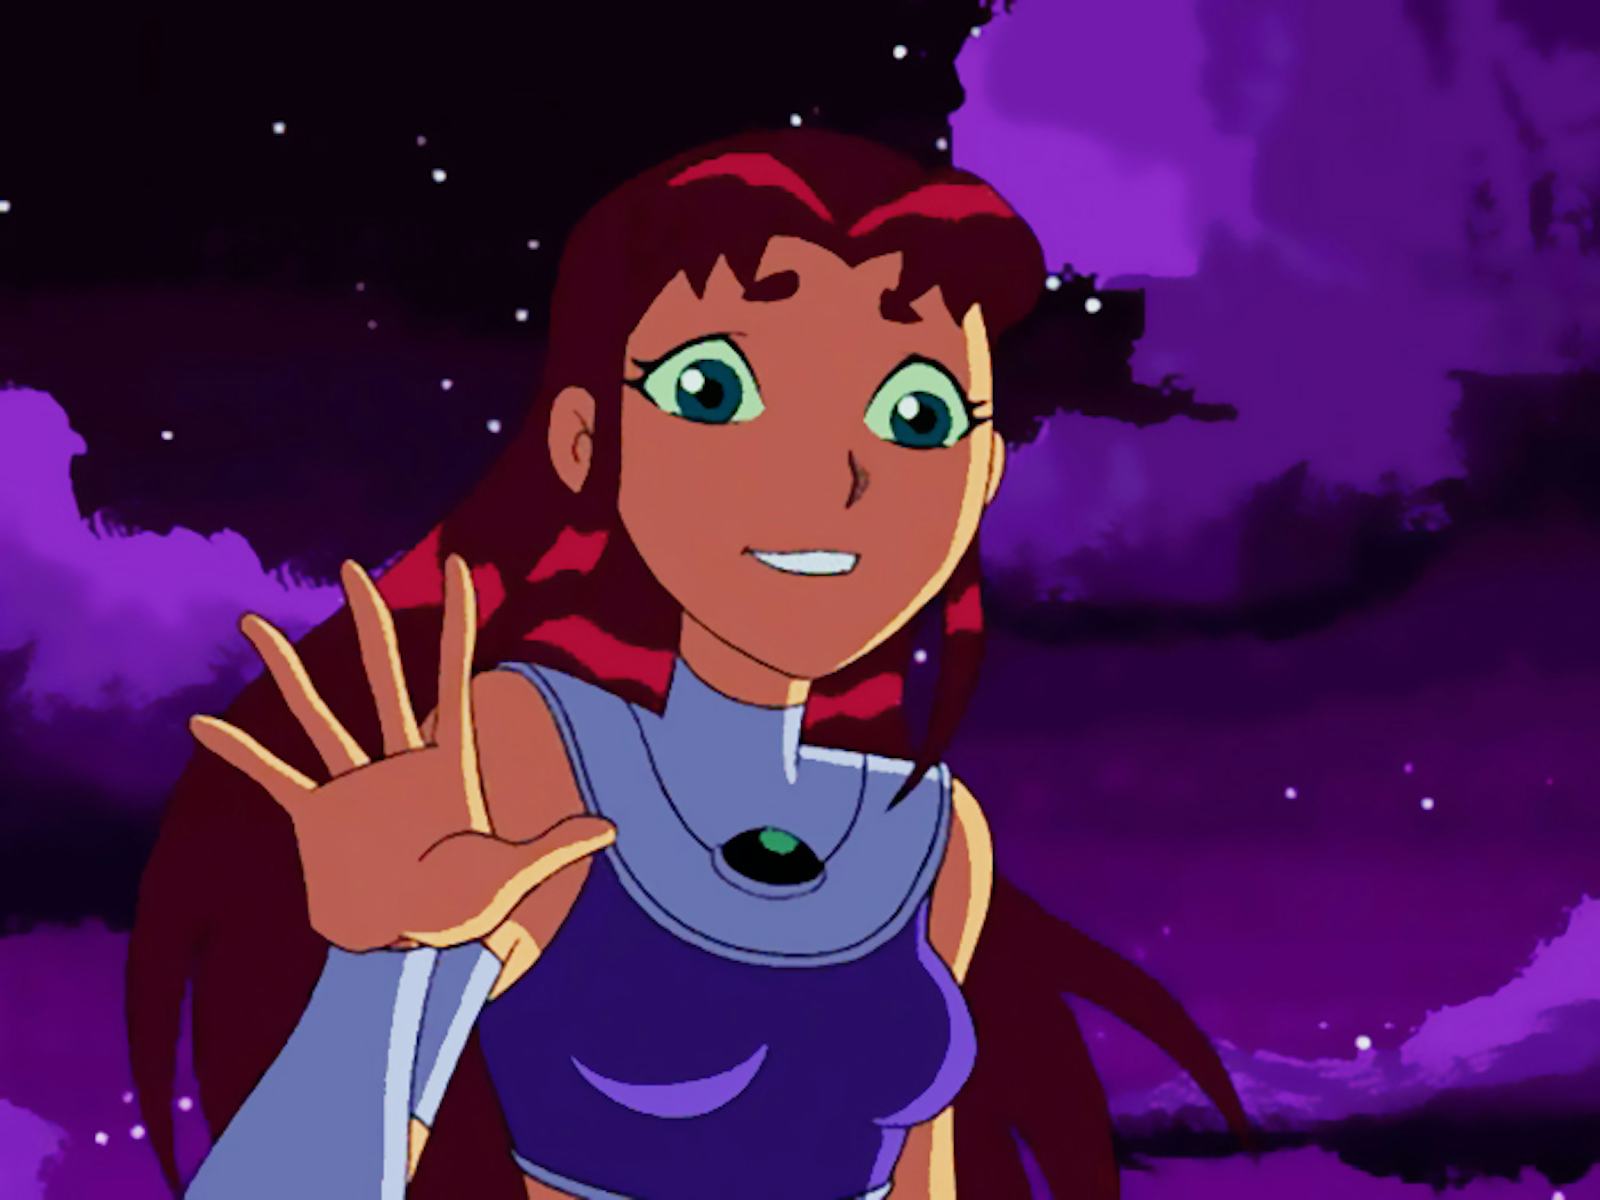 Finish The Teen Titans Starfire Quote To Test Your Knowledge Of The Princess Of Tamaran